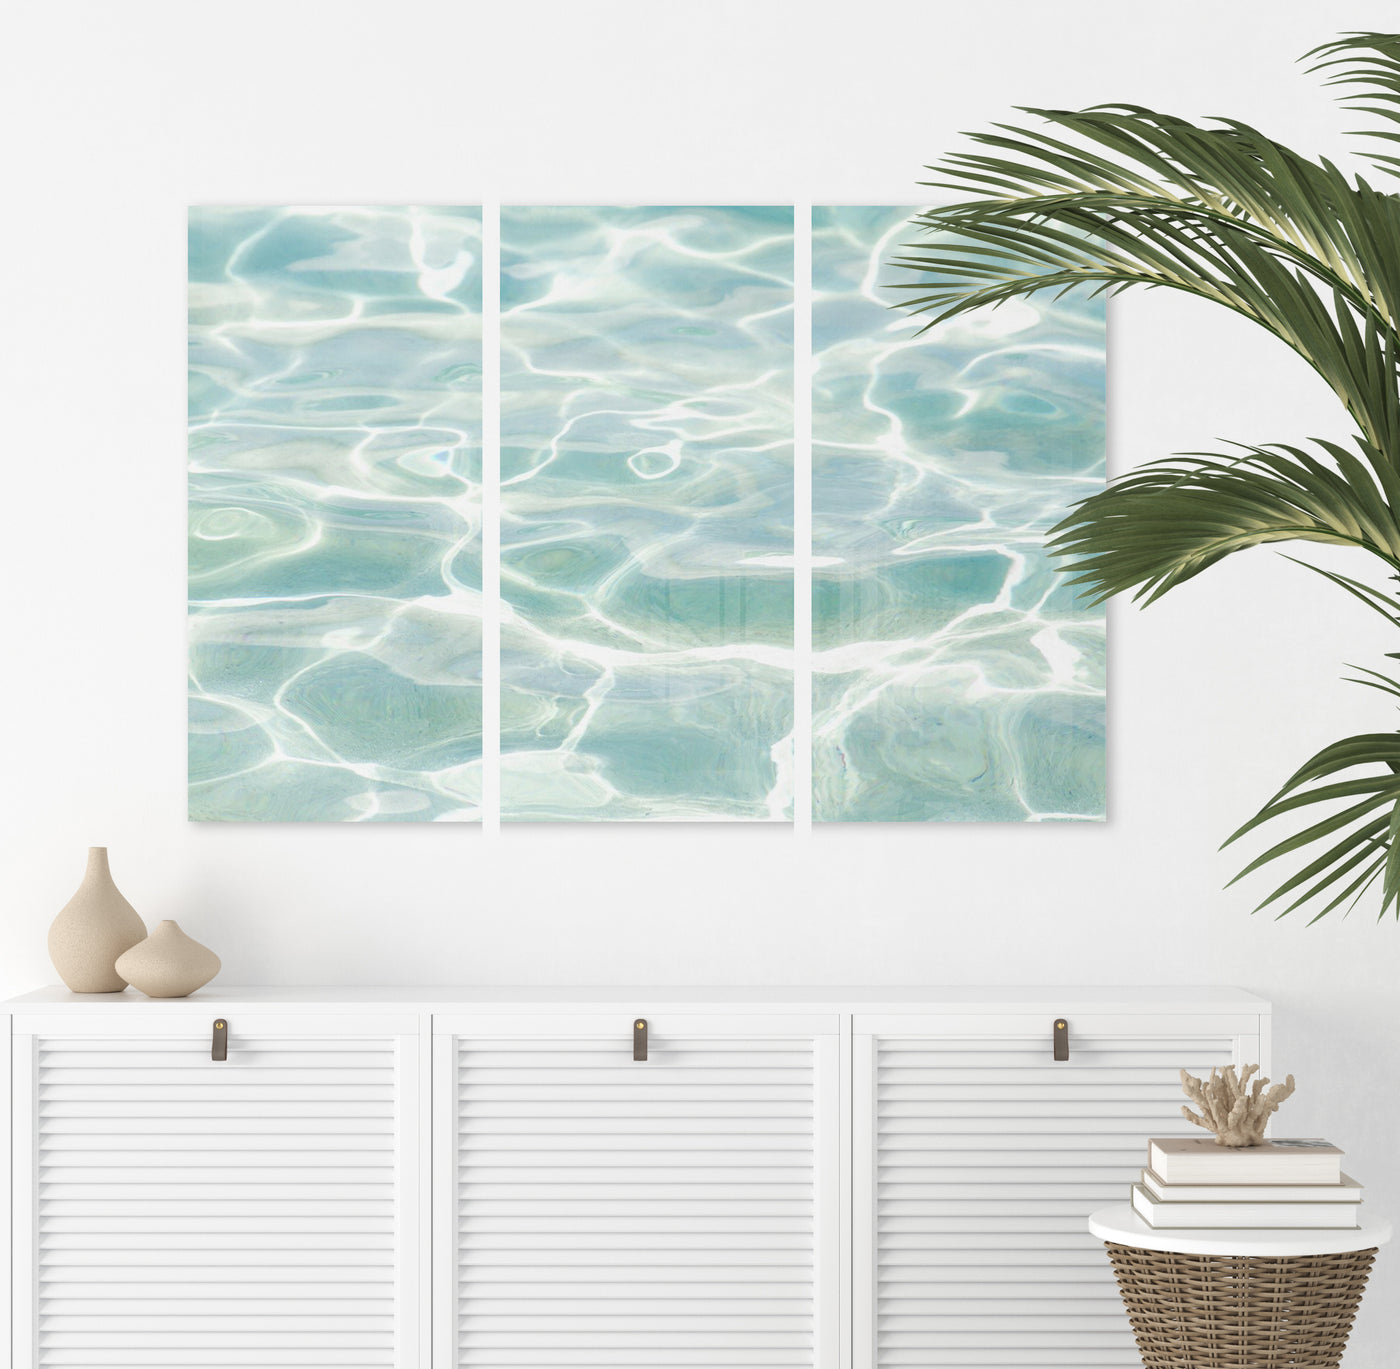 Caribbean Sea No 1 - Acrylic glass 3 panel print by Cattie Coyle Photography above dresser